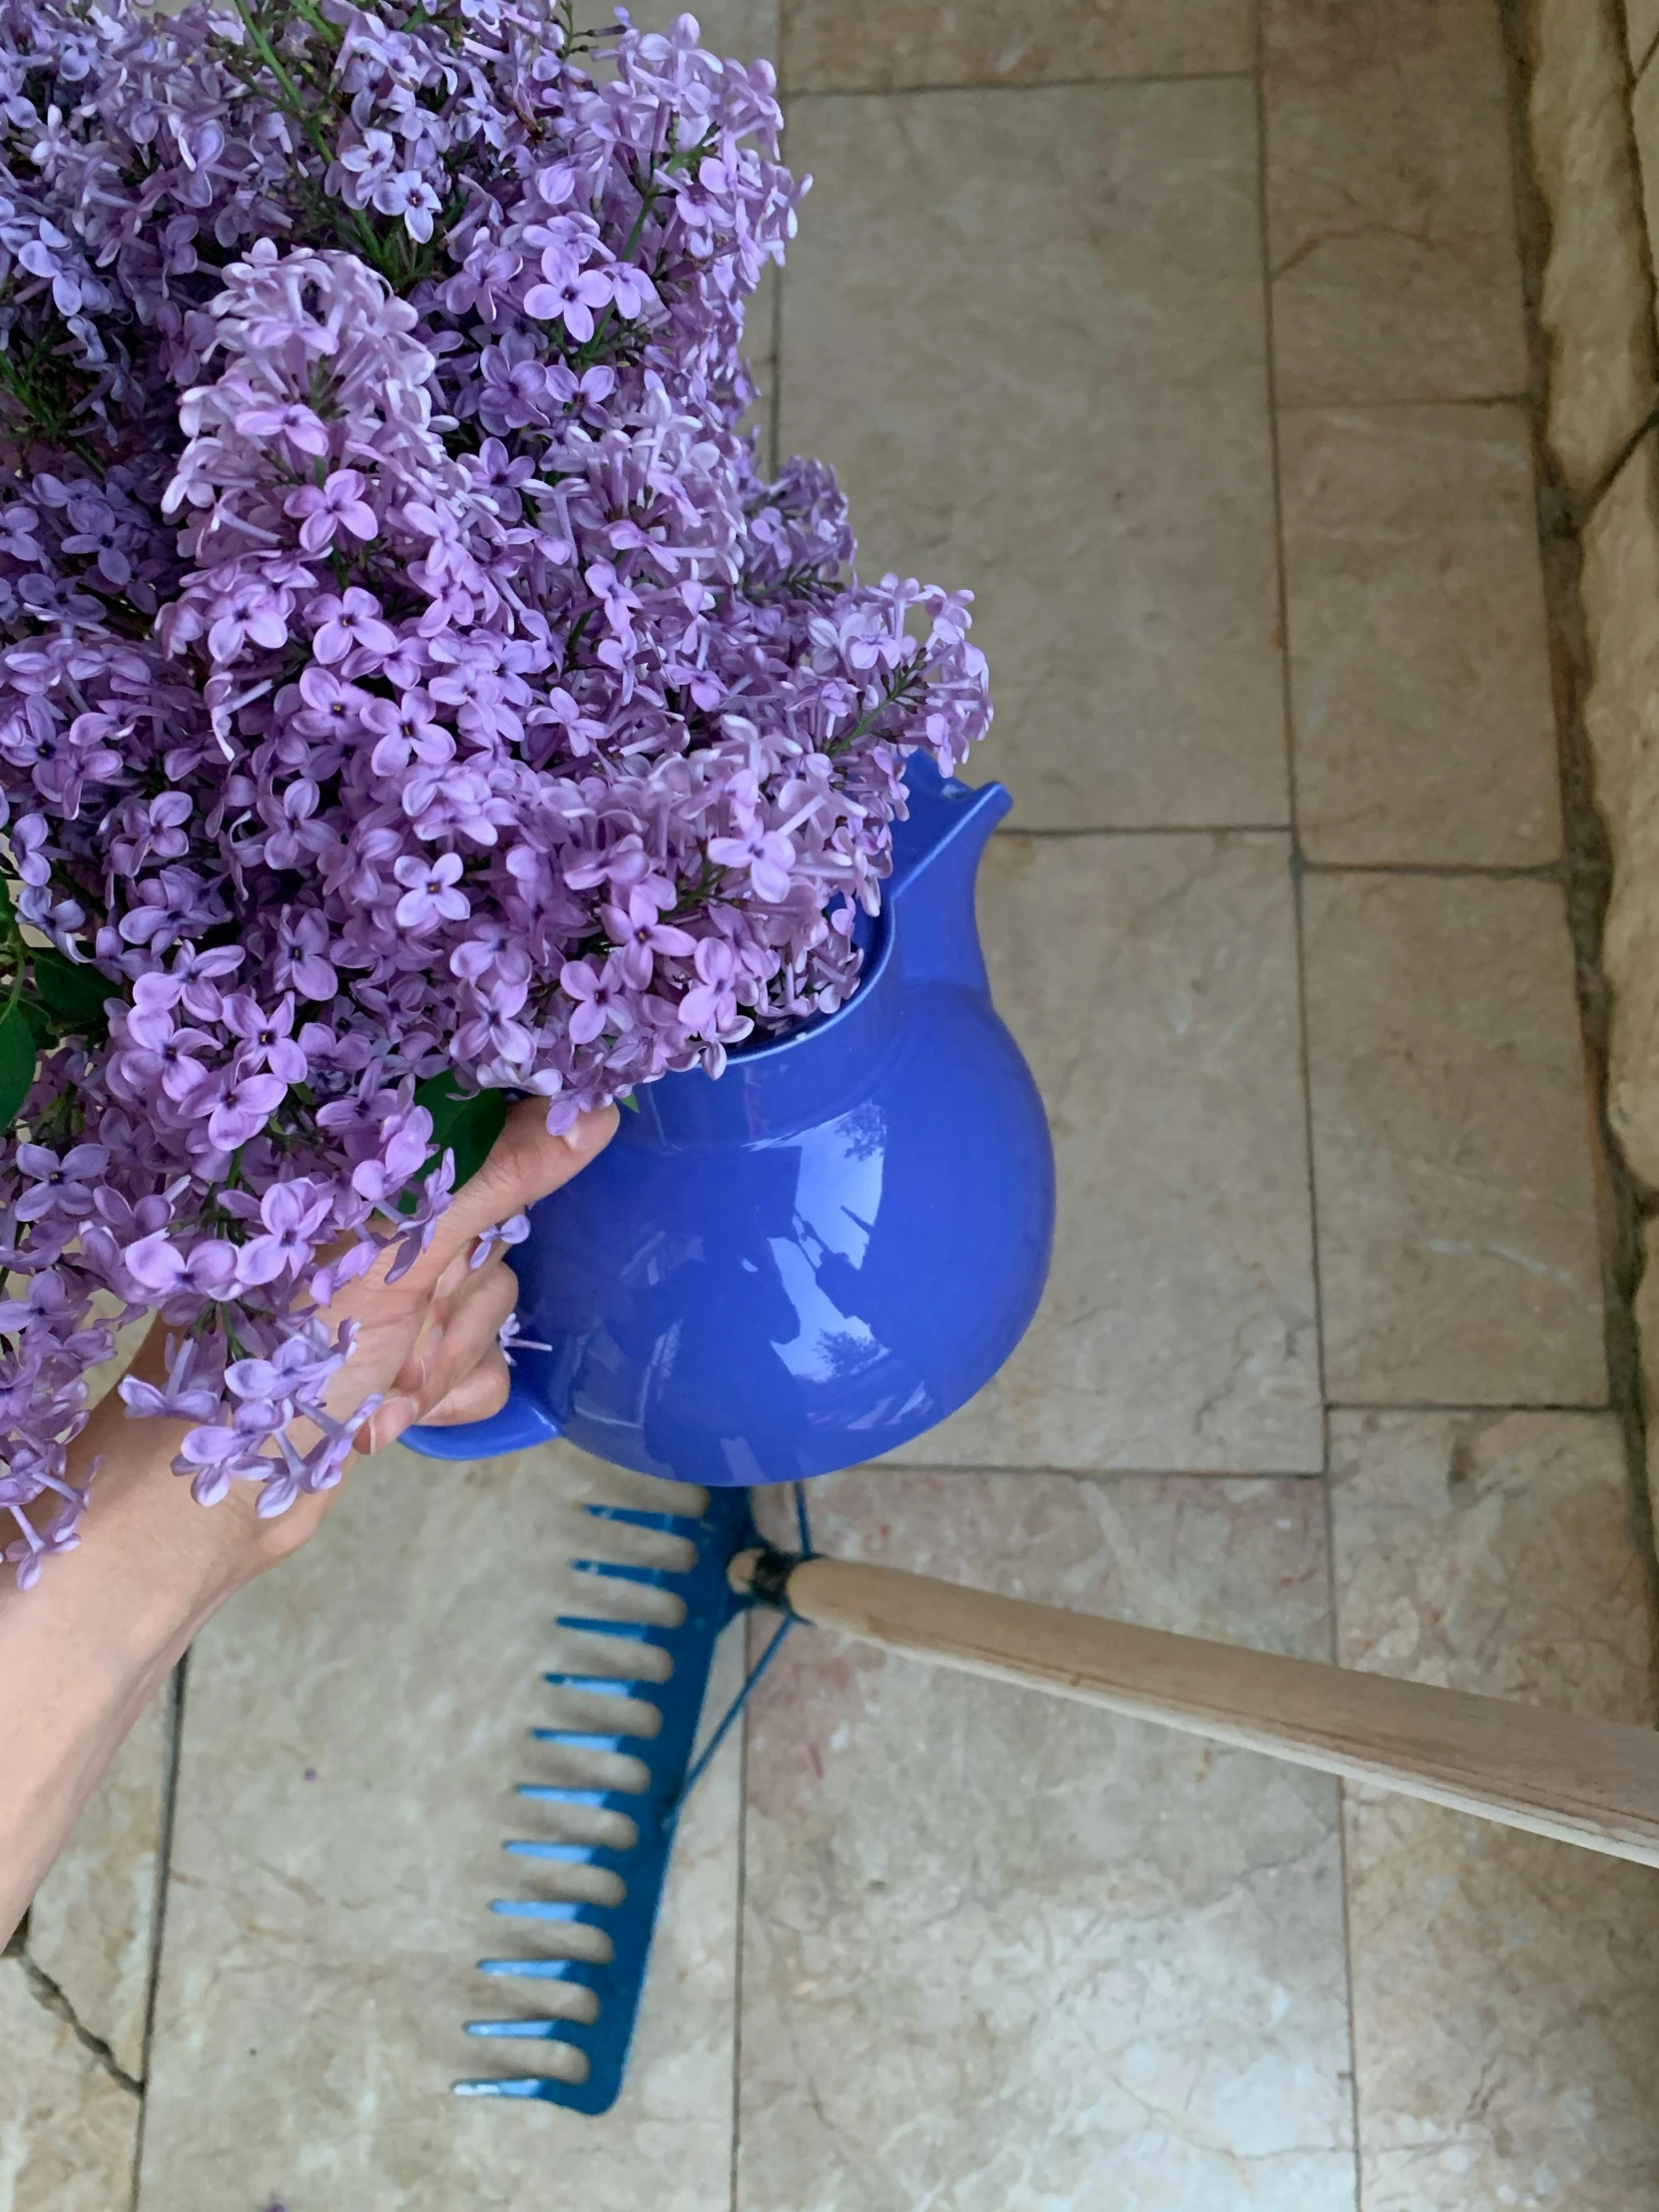 the purple flowers in the blue vase have long stems